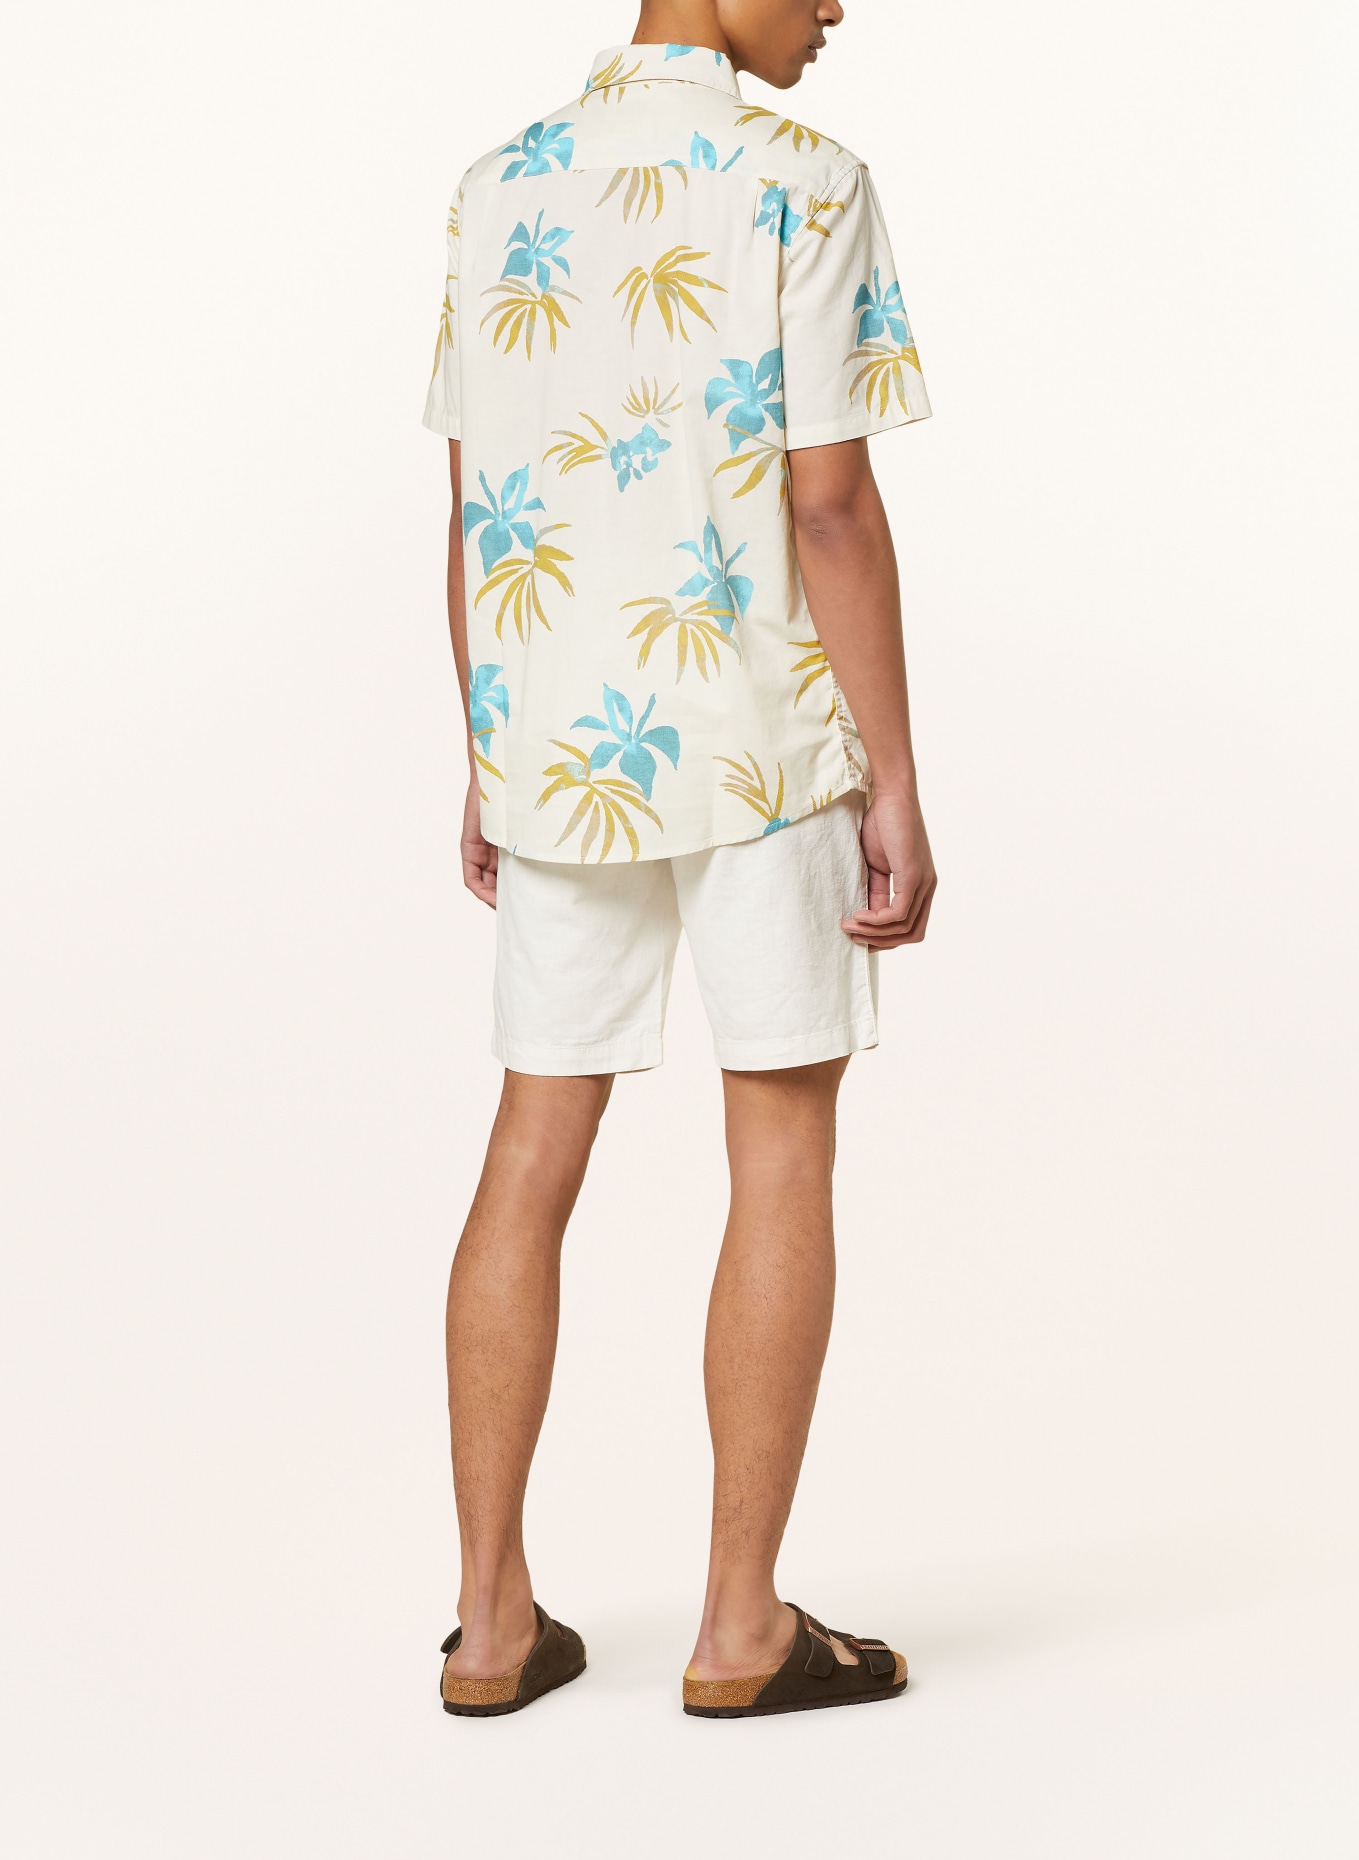 QUIKSILVER Short sleeve shirt APERO CLASSIC comfort fit, Color: LIGHT YELLOW/ TURQUOISE/ DARK YELLOW (Image 3)